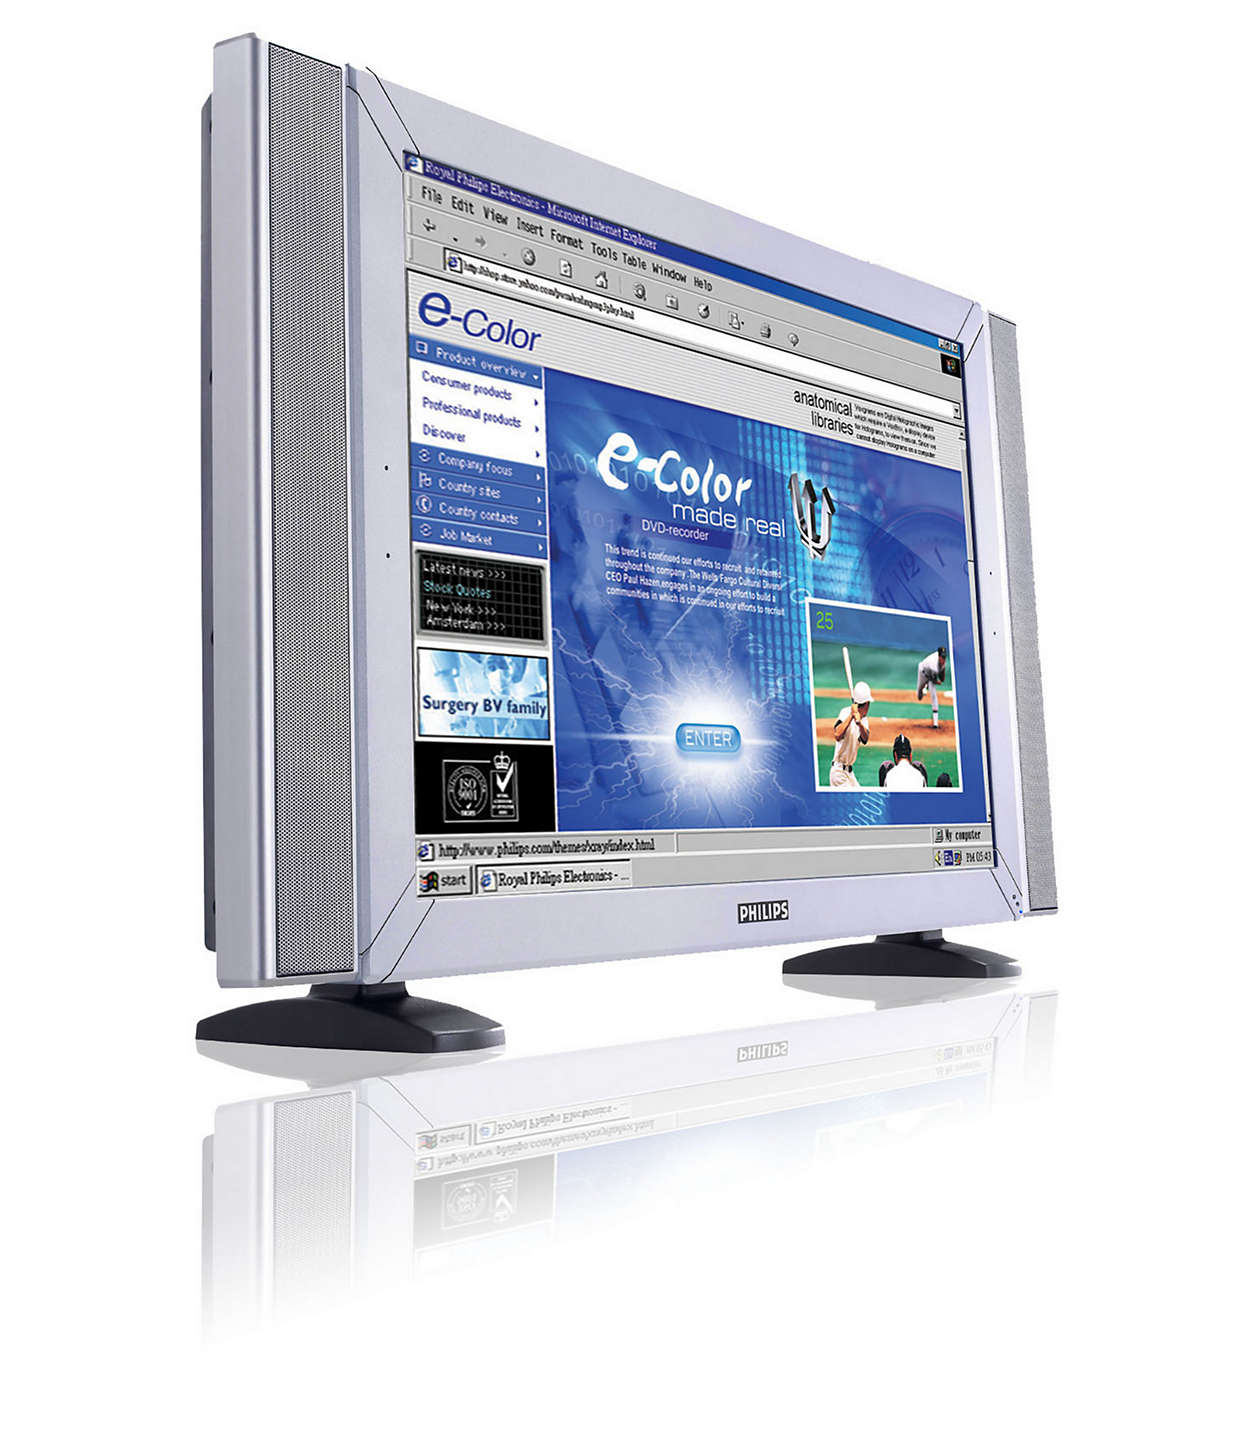 excellent and robust display solution